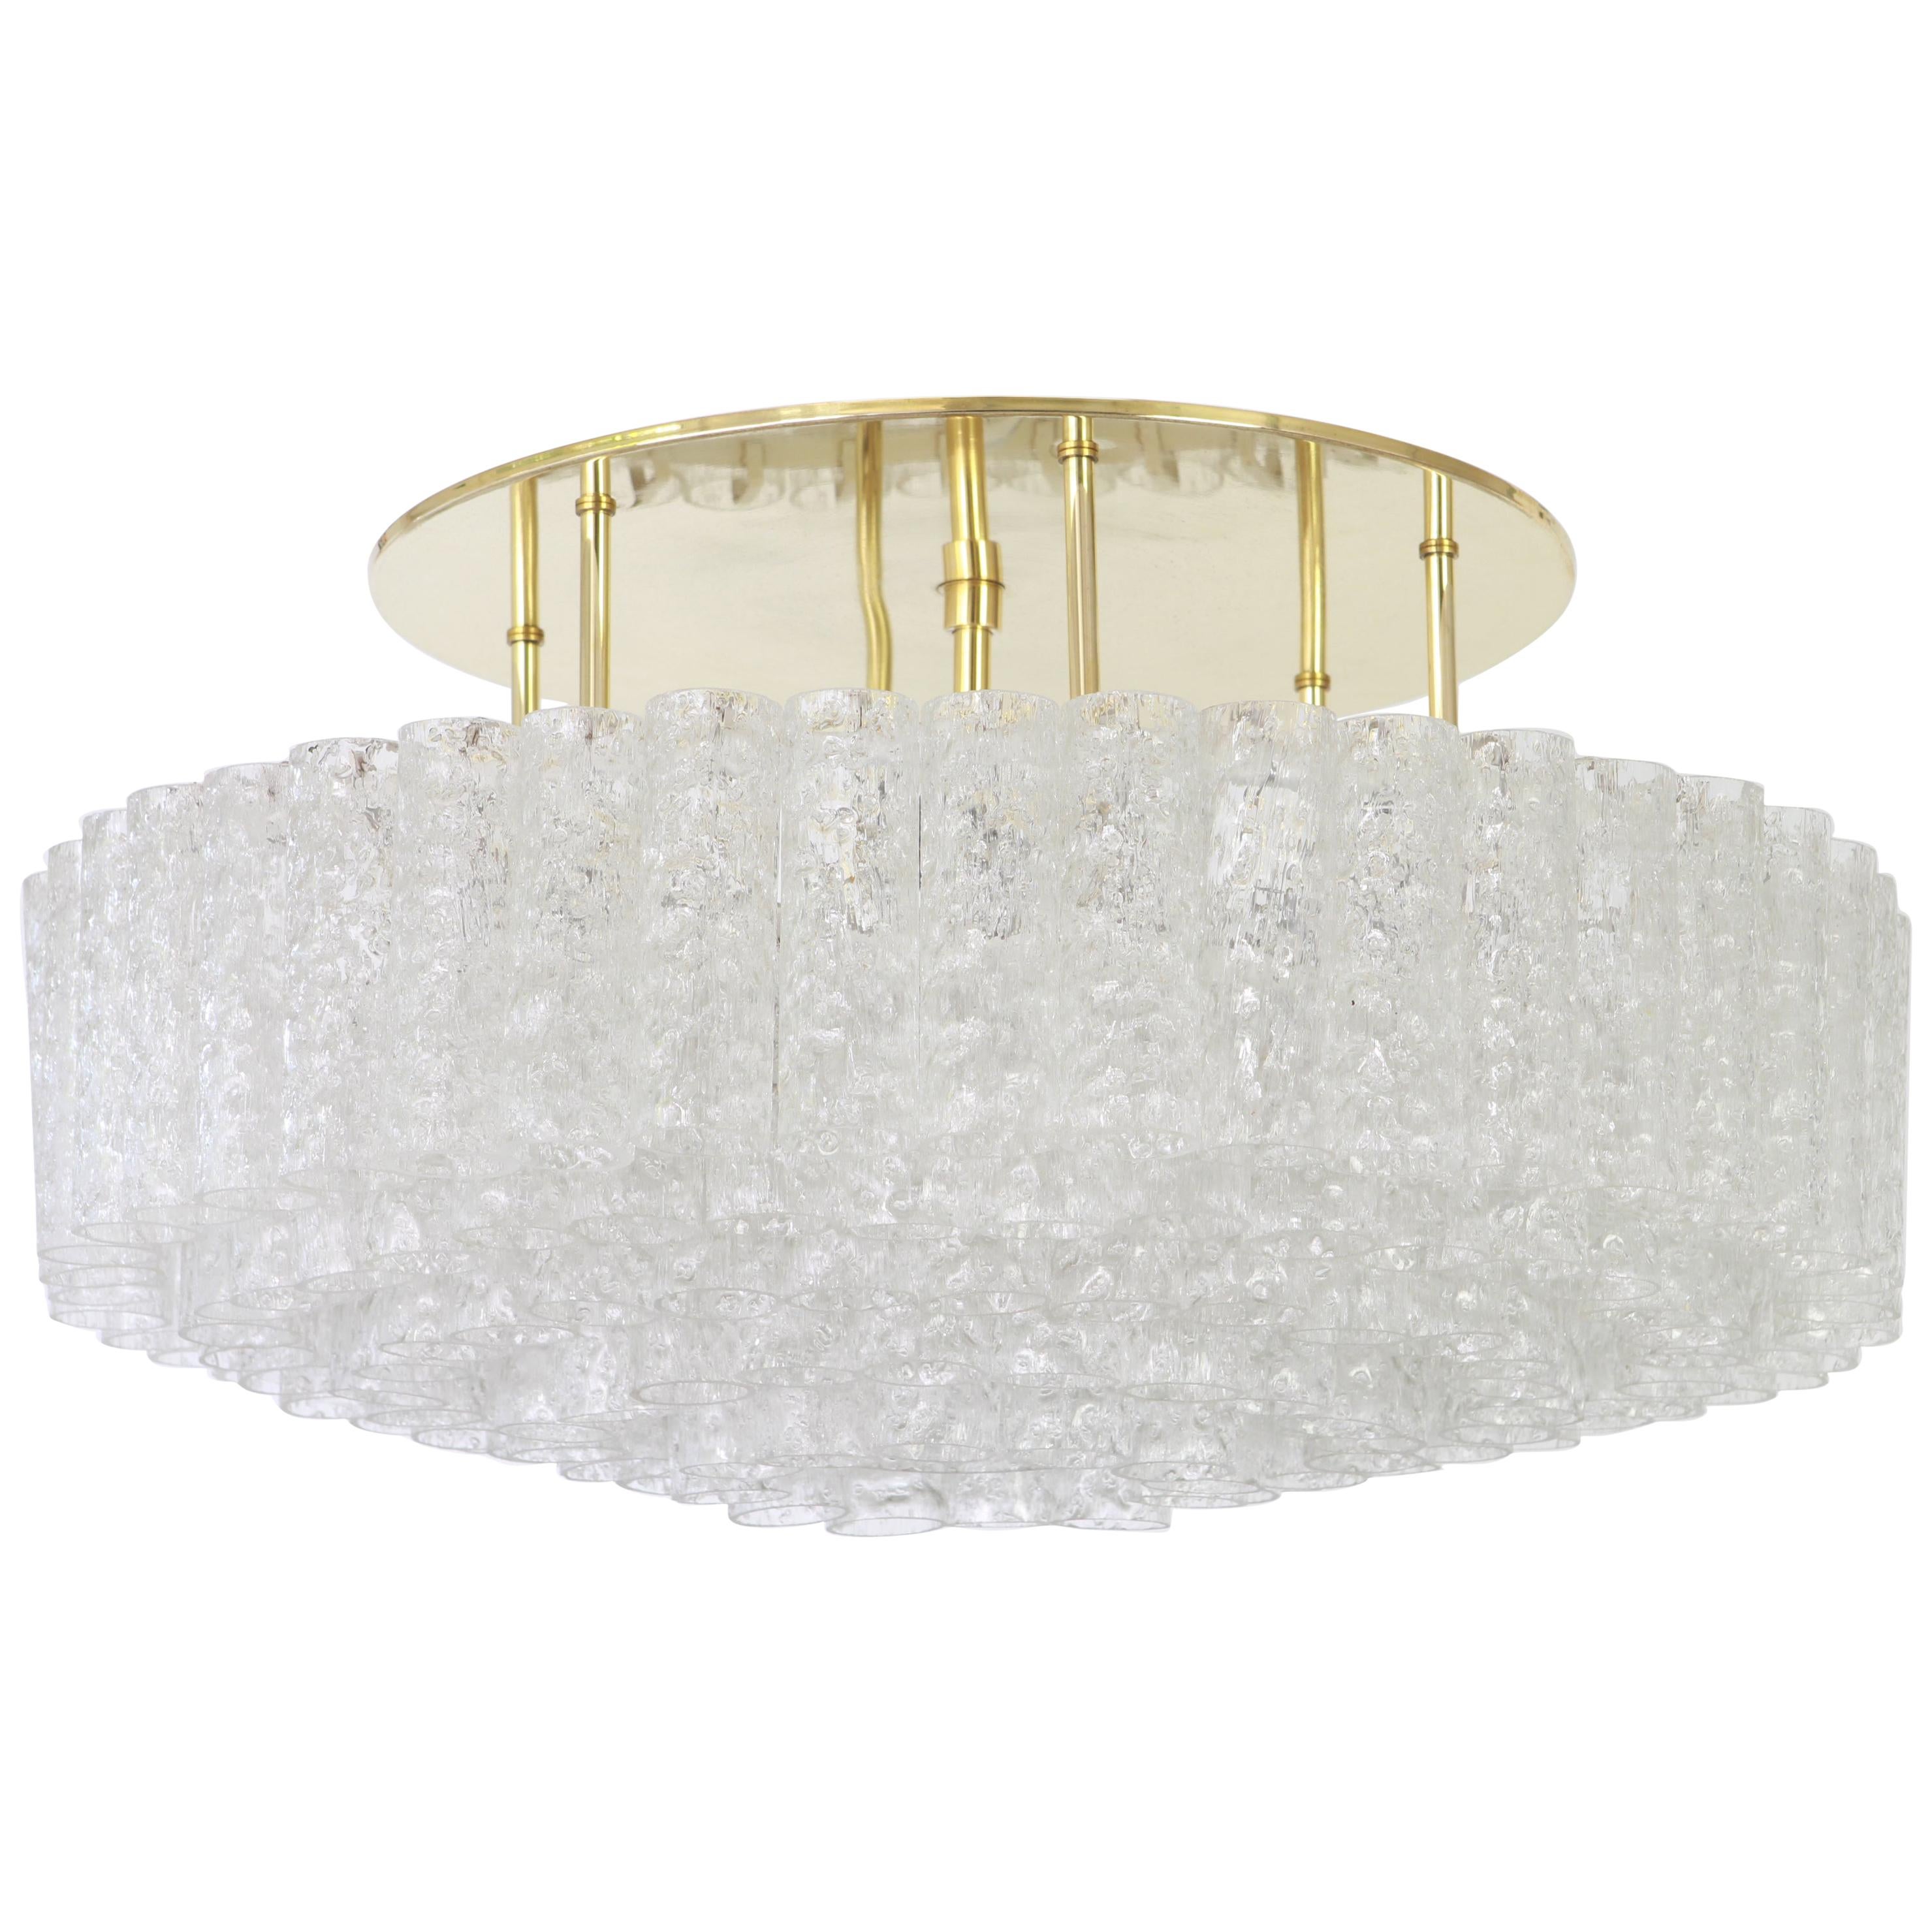 Large Murano Glass Tubes Chandelier by Doria, Germany, 1960s For Sale